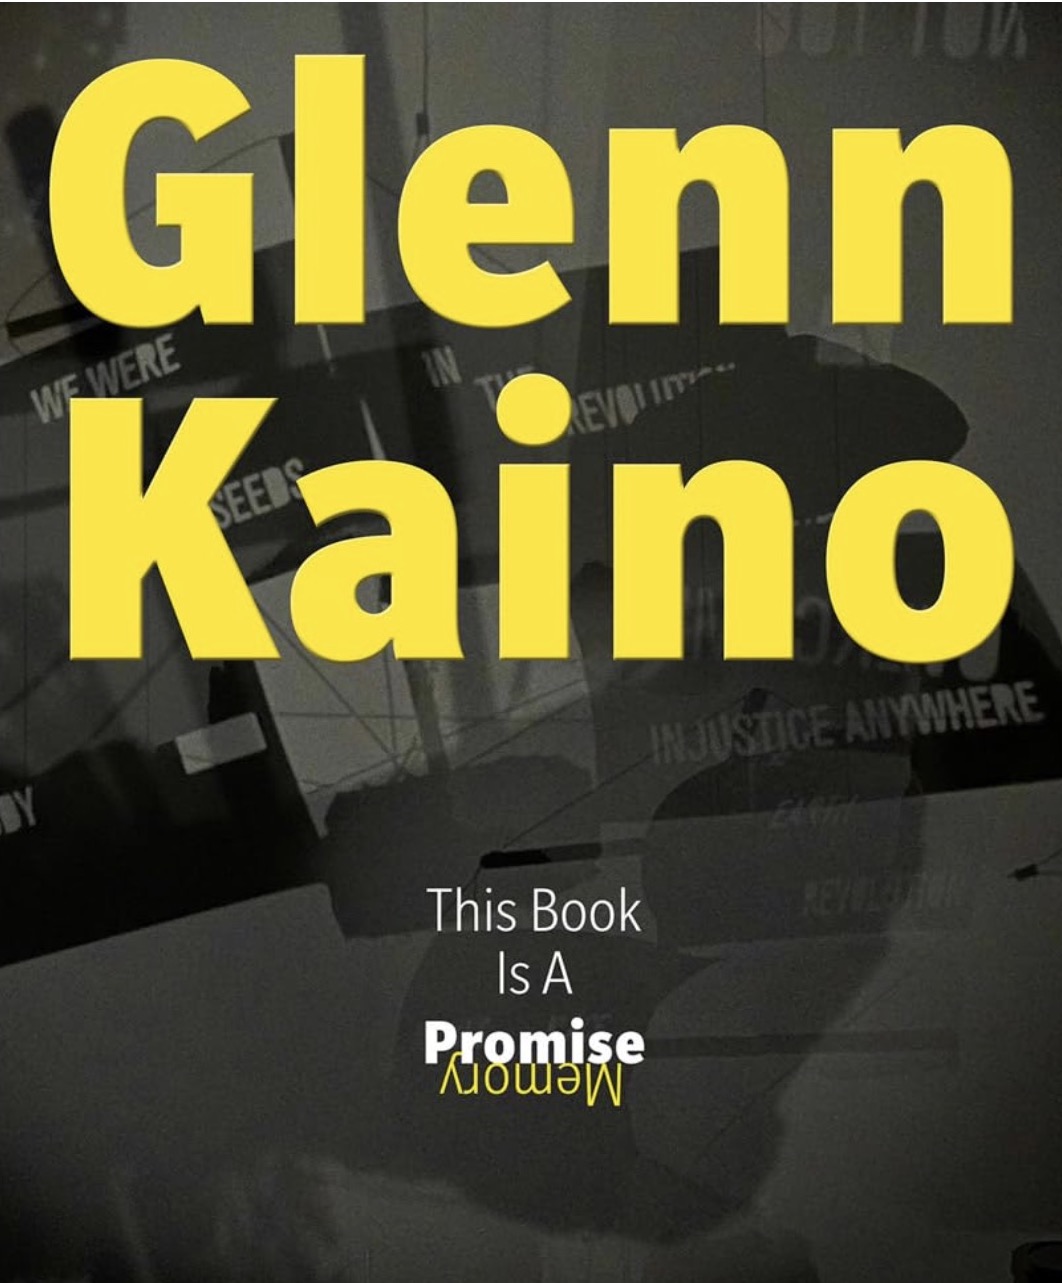 This Book Is a Promise / This Book Is a Memory - Glenn Kaino